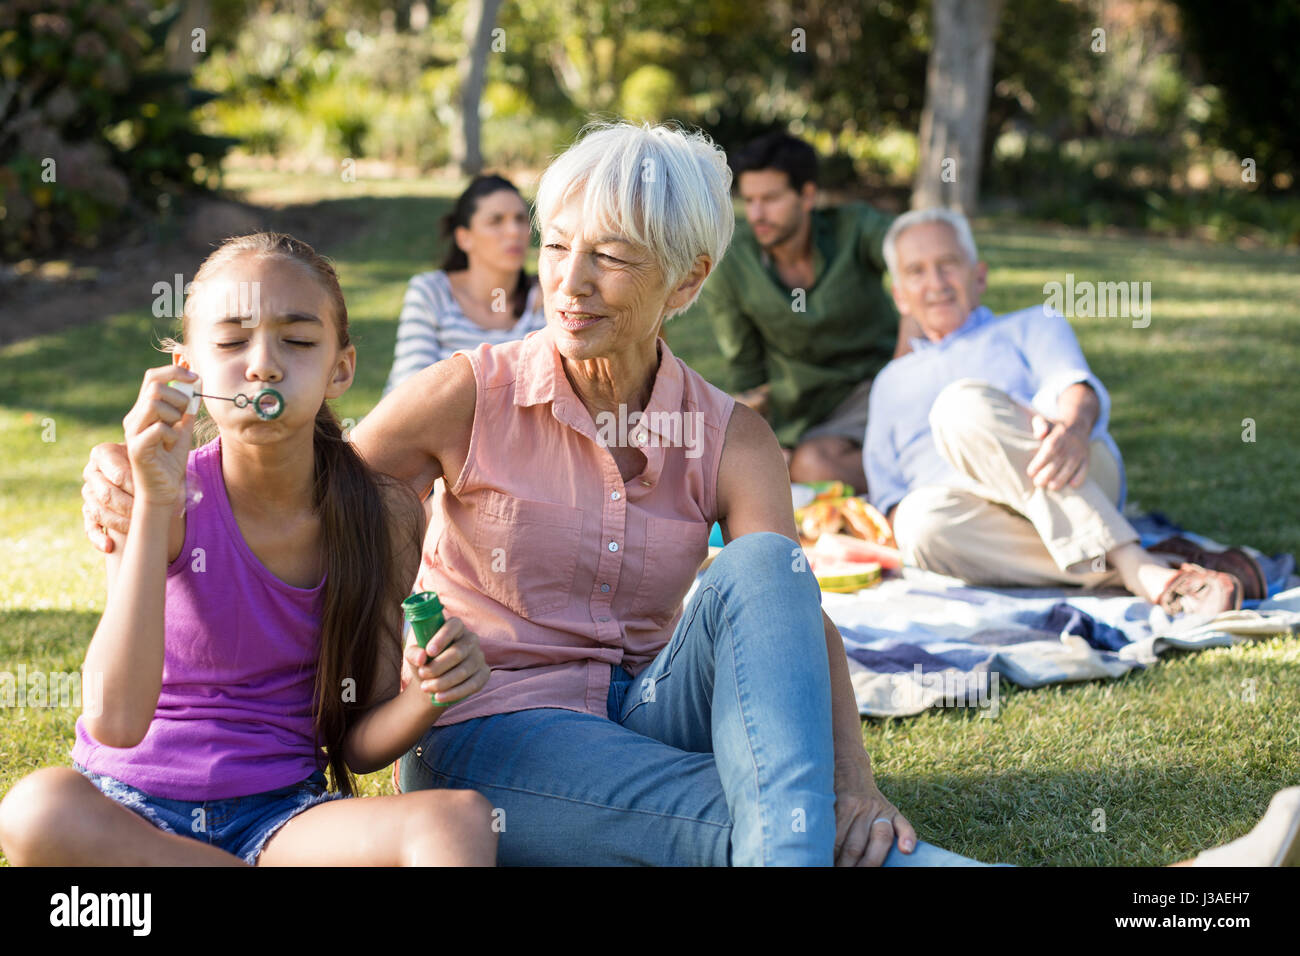 Grand mother looking at her granddaughter blowing bubbles in the park on a sunny day Stock Photo